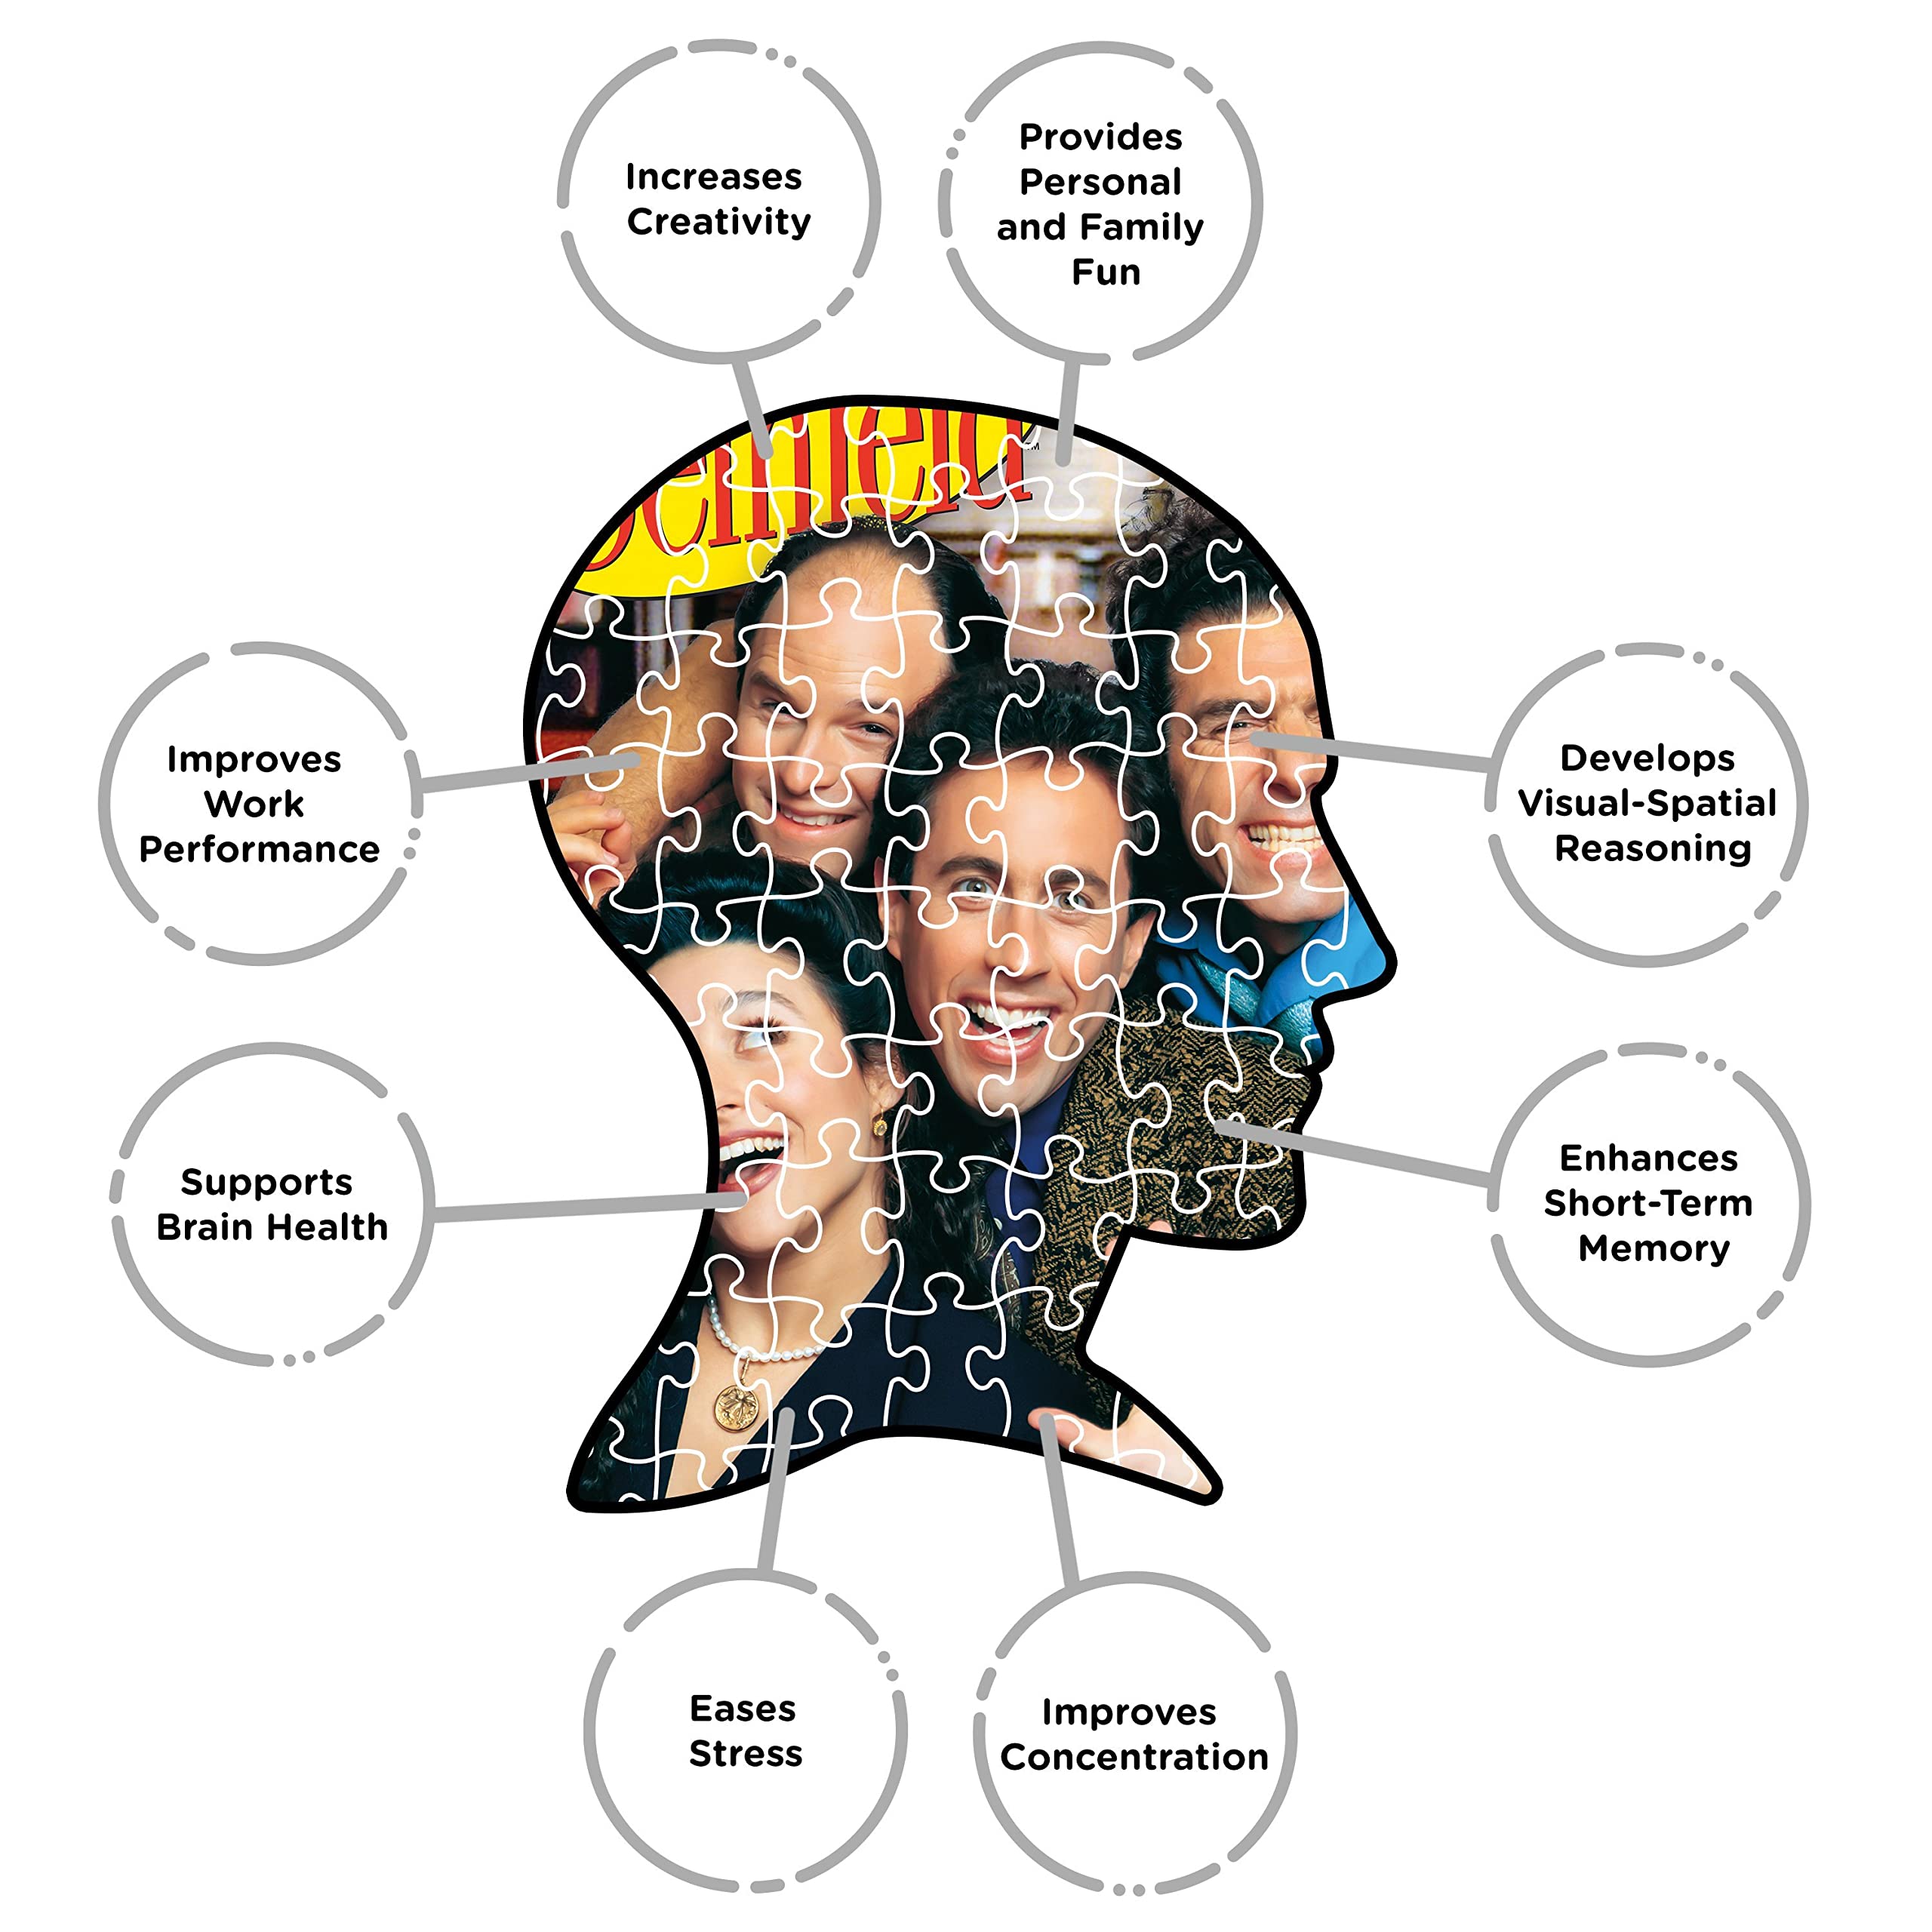 AQUARIUS Seinfeld Group Puzzle (500 Piece Jigsaw Puzzle) - Glare Free - Precision Fit - Officially Licensed Seinfeld Merchandise & Collectibles - 14 x 19 Inches